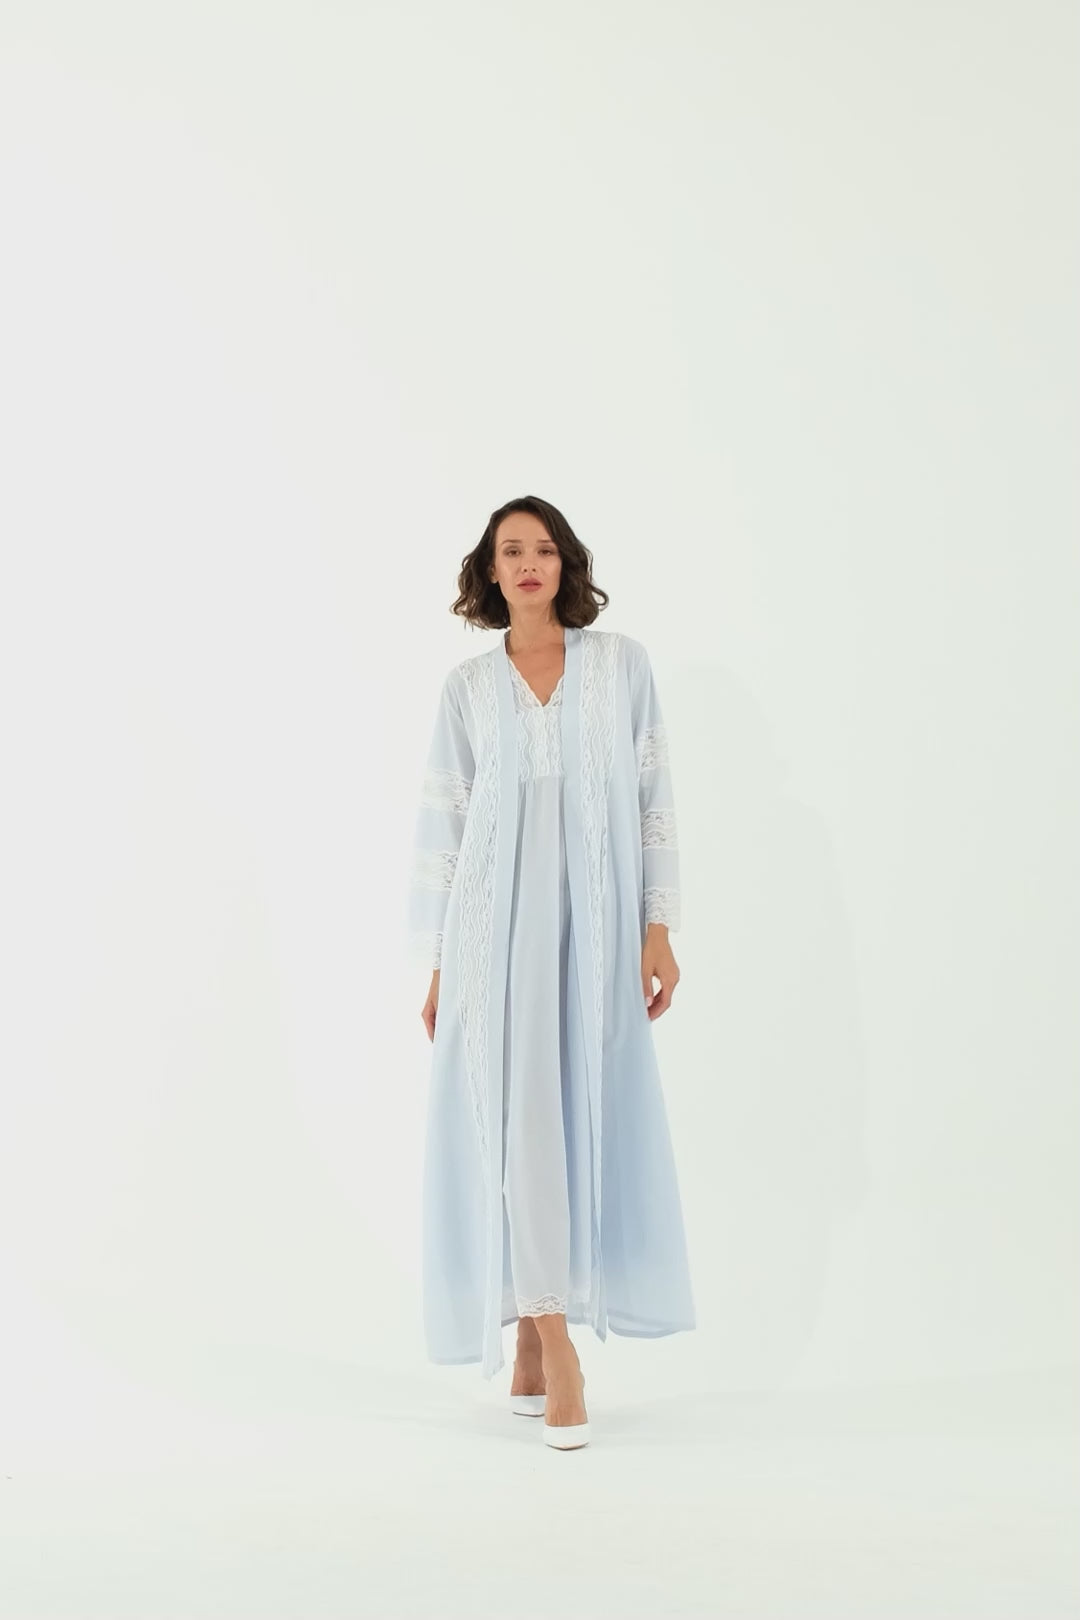 Blooming Marvellous Maternity Nightdress And Robe Set  Dresses for pregnant  women, Maternity clothes, Maternity fashion